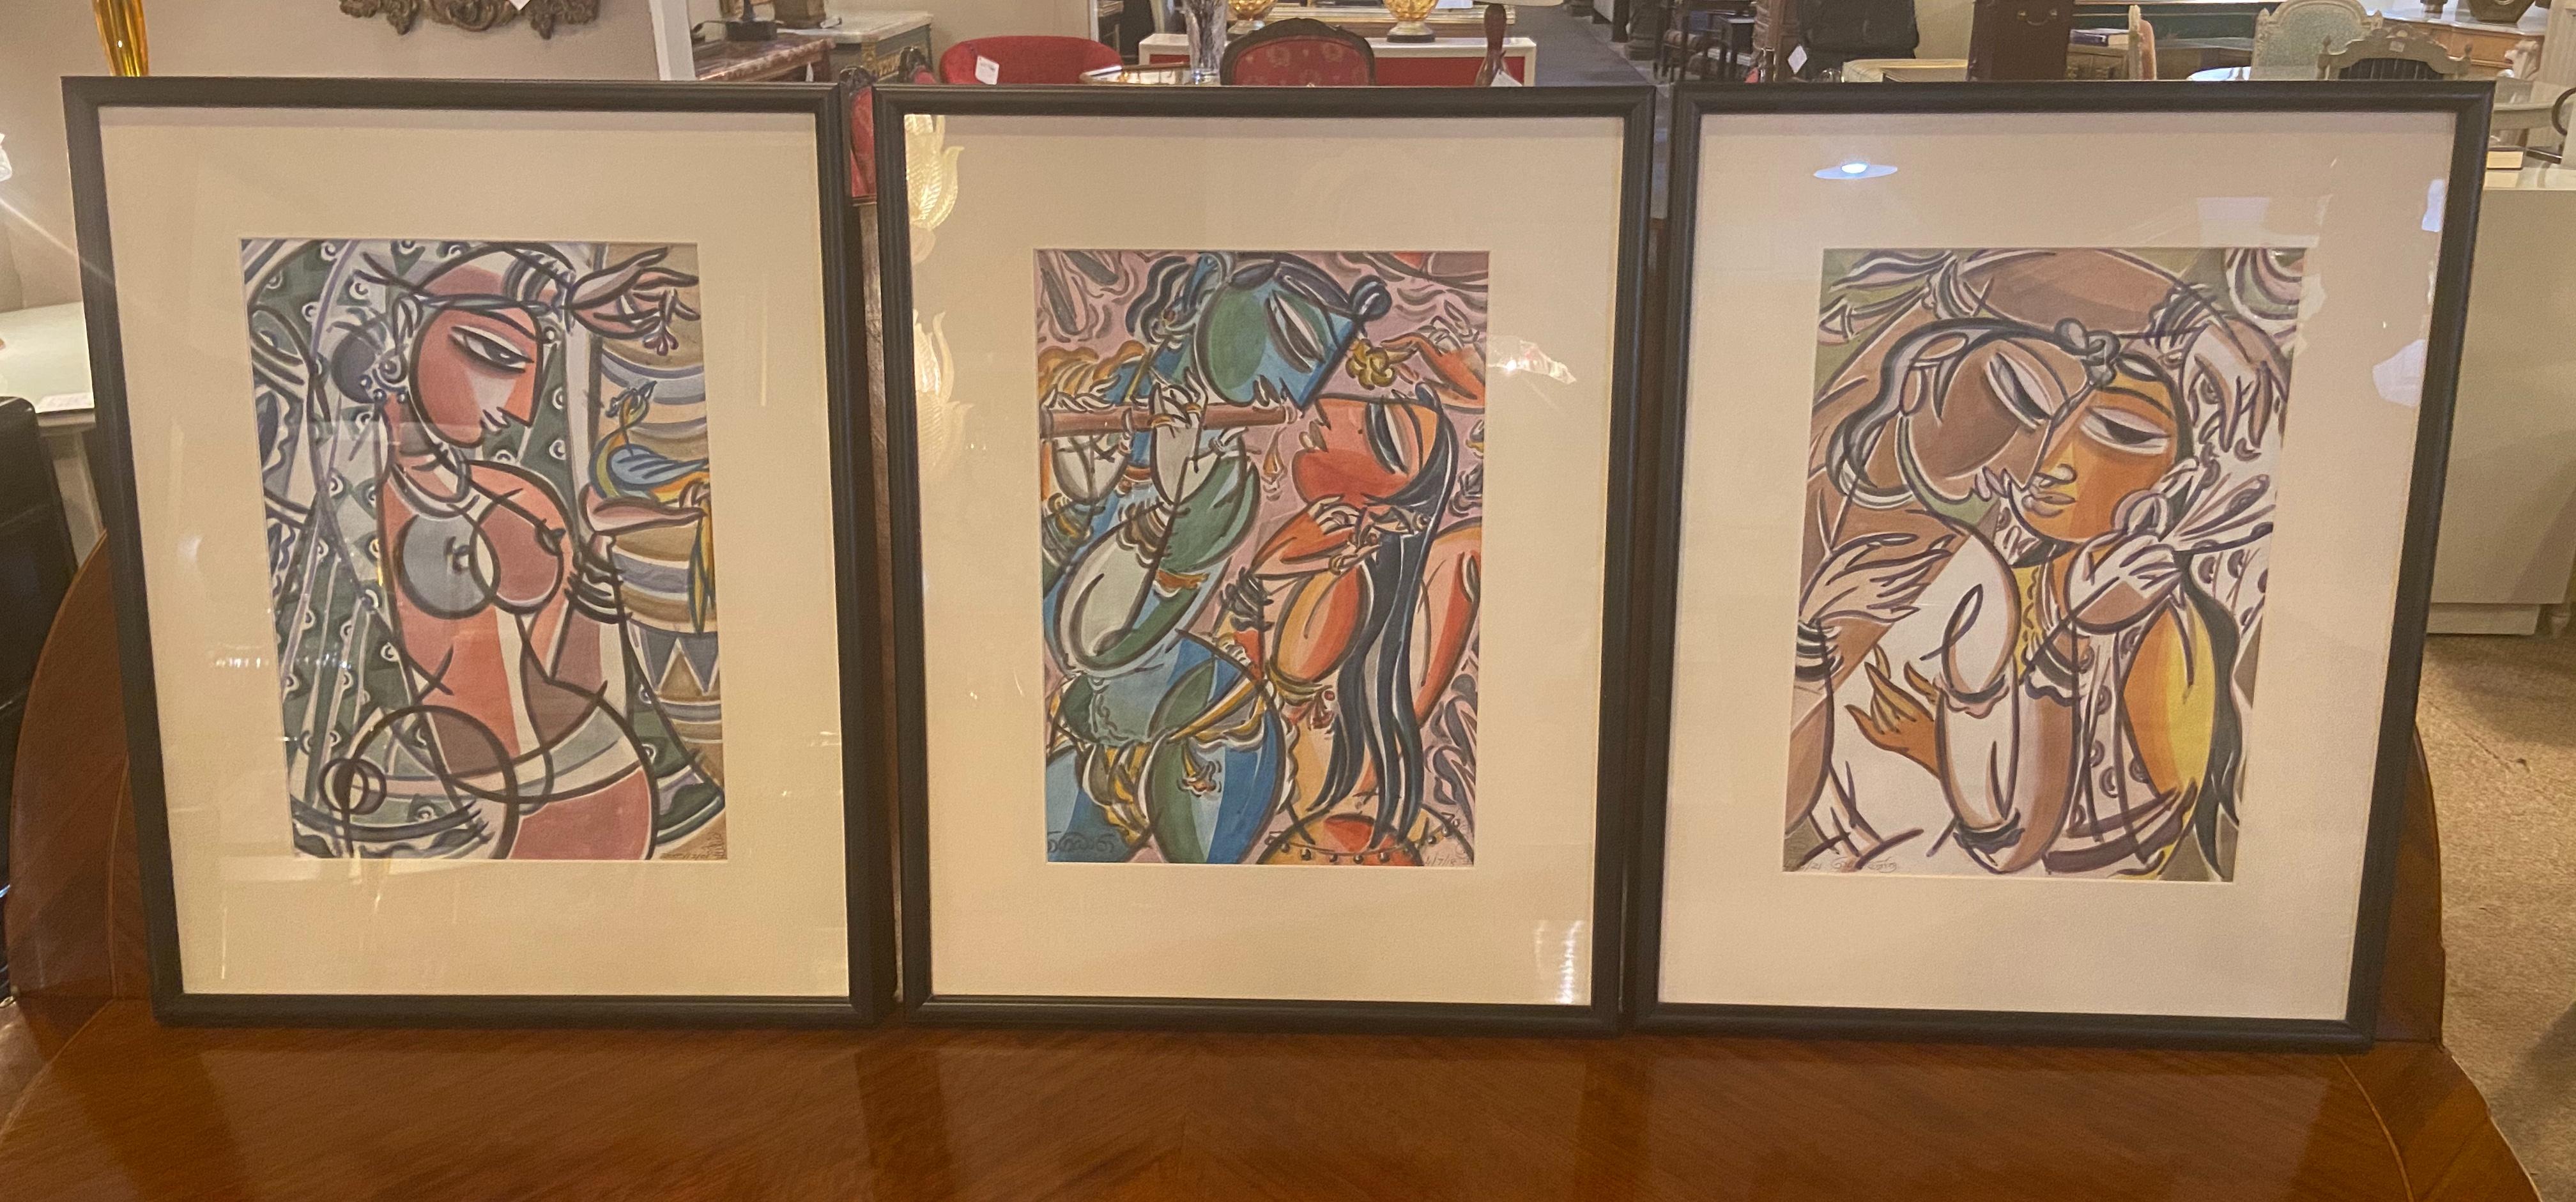 Man and Woman Figurative Water Color Paintings in the Style of Picasso, Set of 3 - Art by Unknown